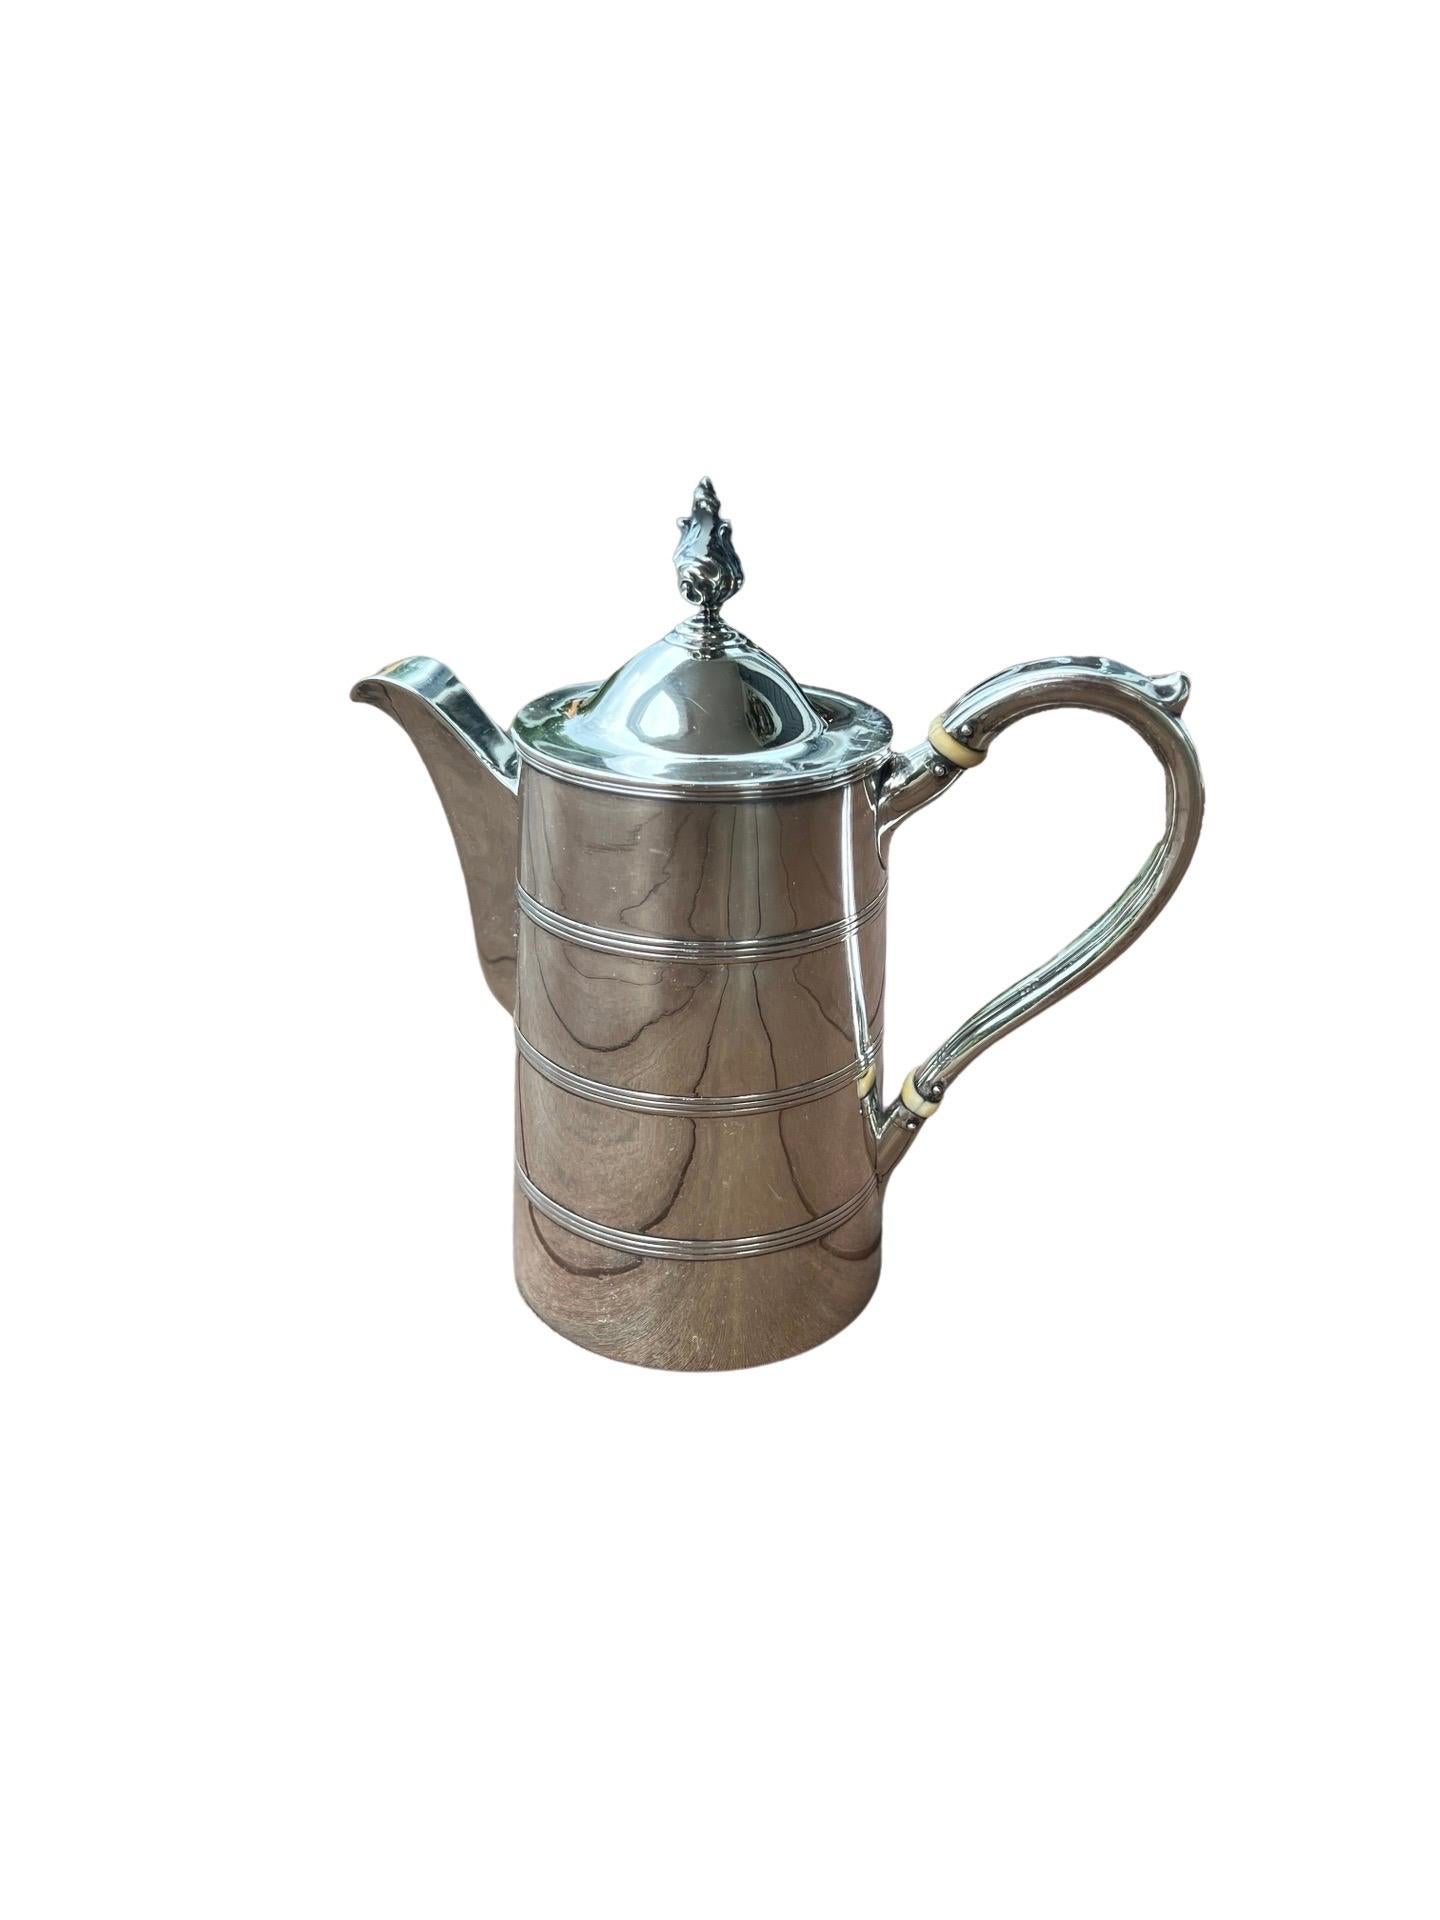 Henry Chawner Antique George III Sterling Silver Teapot Circa 1794

Beautiful 18th century Georgian silver teapot in a tankard style stacked form, hefty spout and ivory insulators to handle. Fully marked to bottom. Weight approx: 20 OZT
There is an